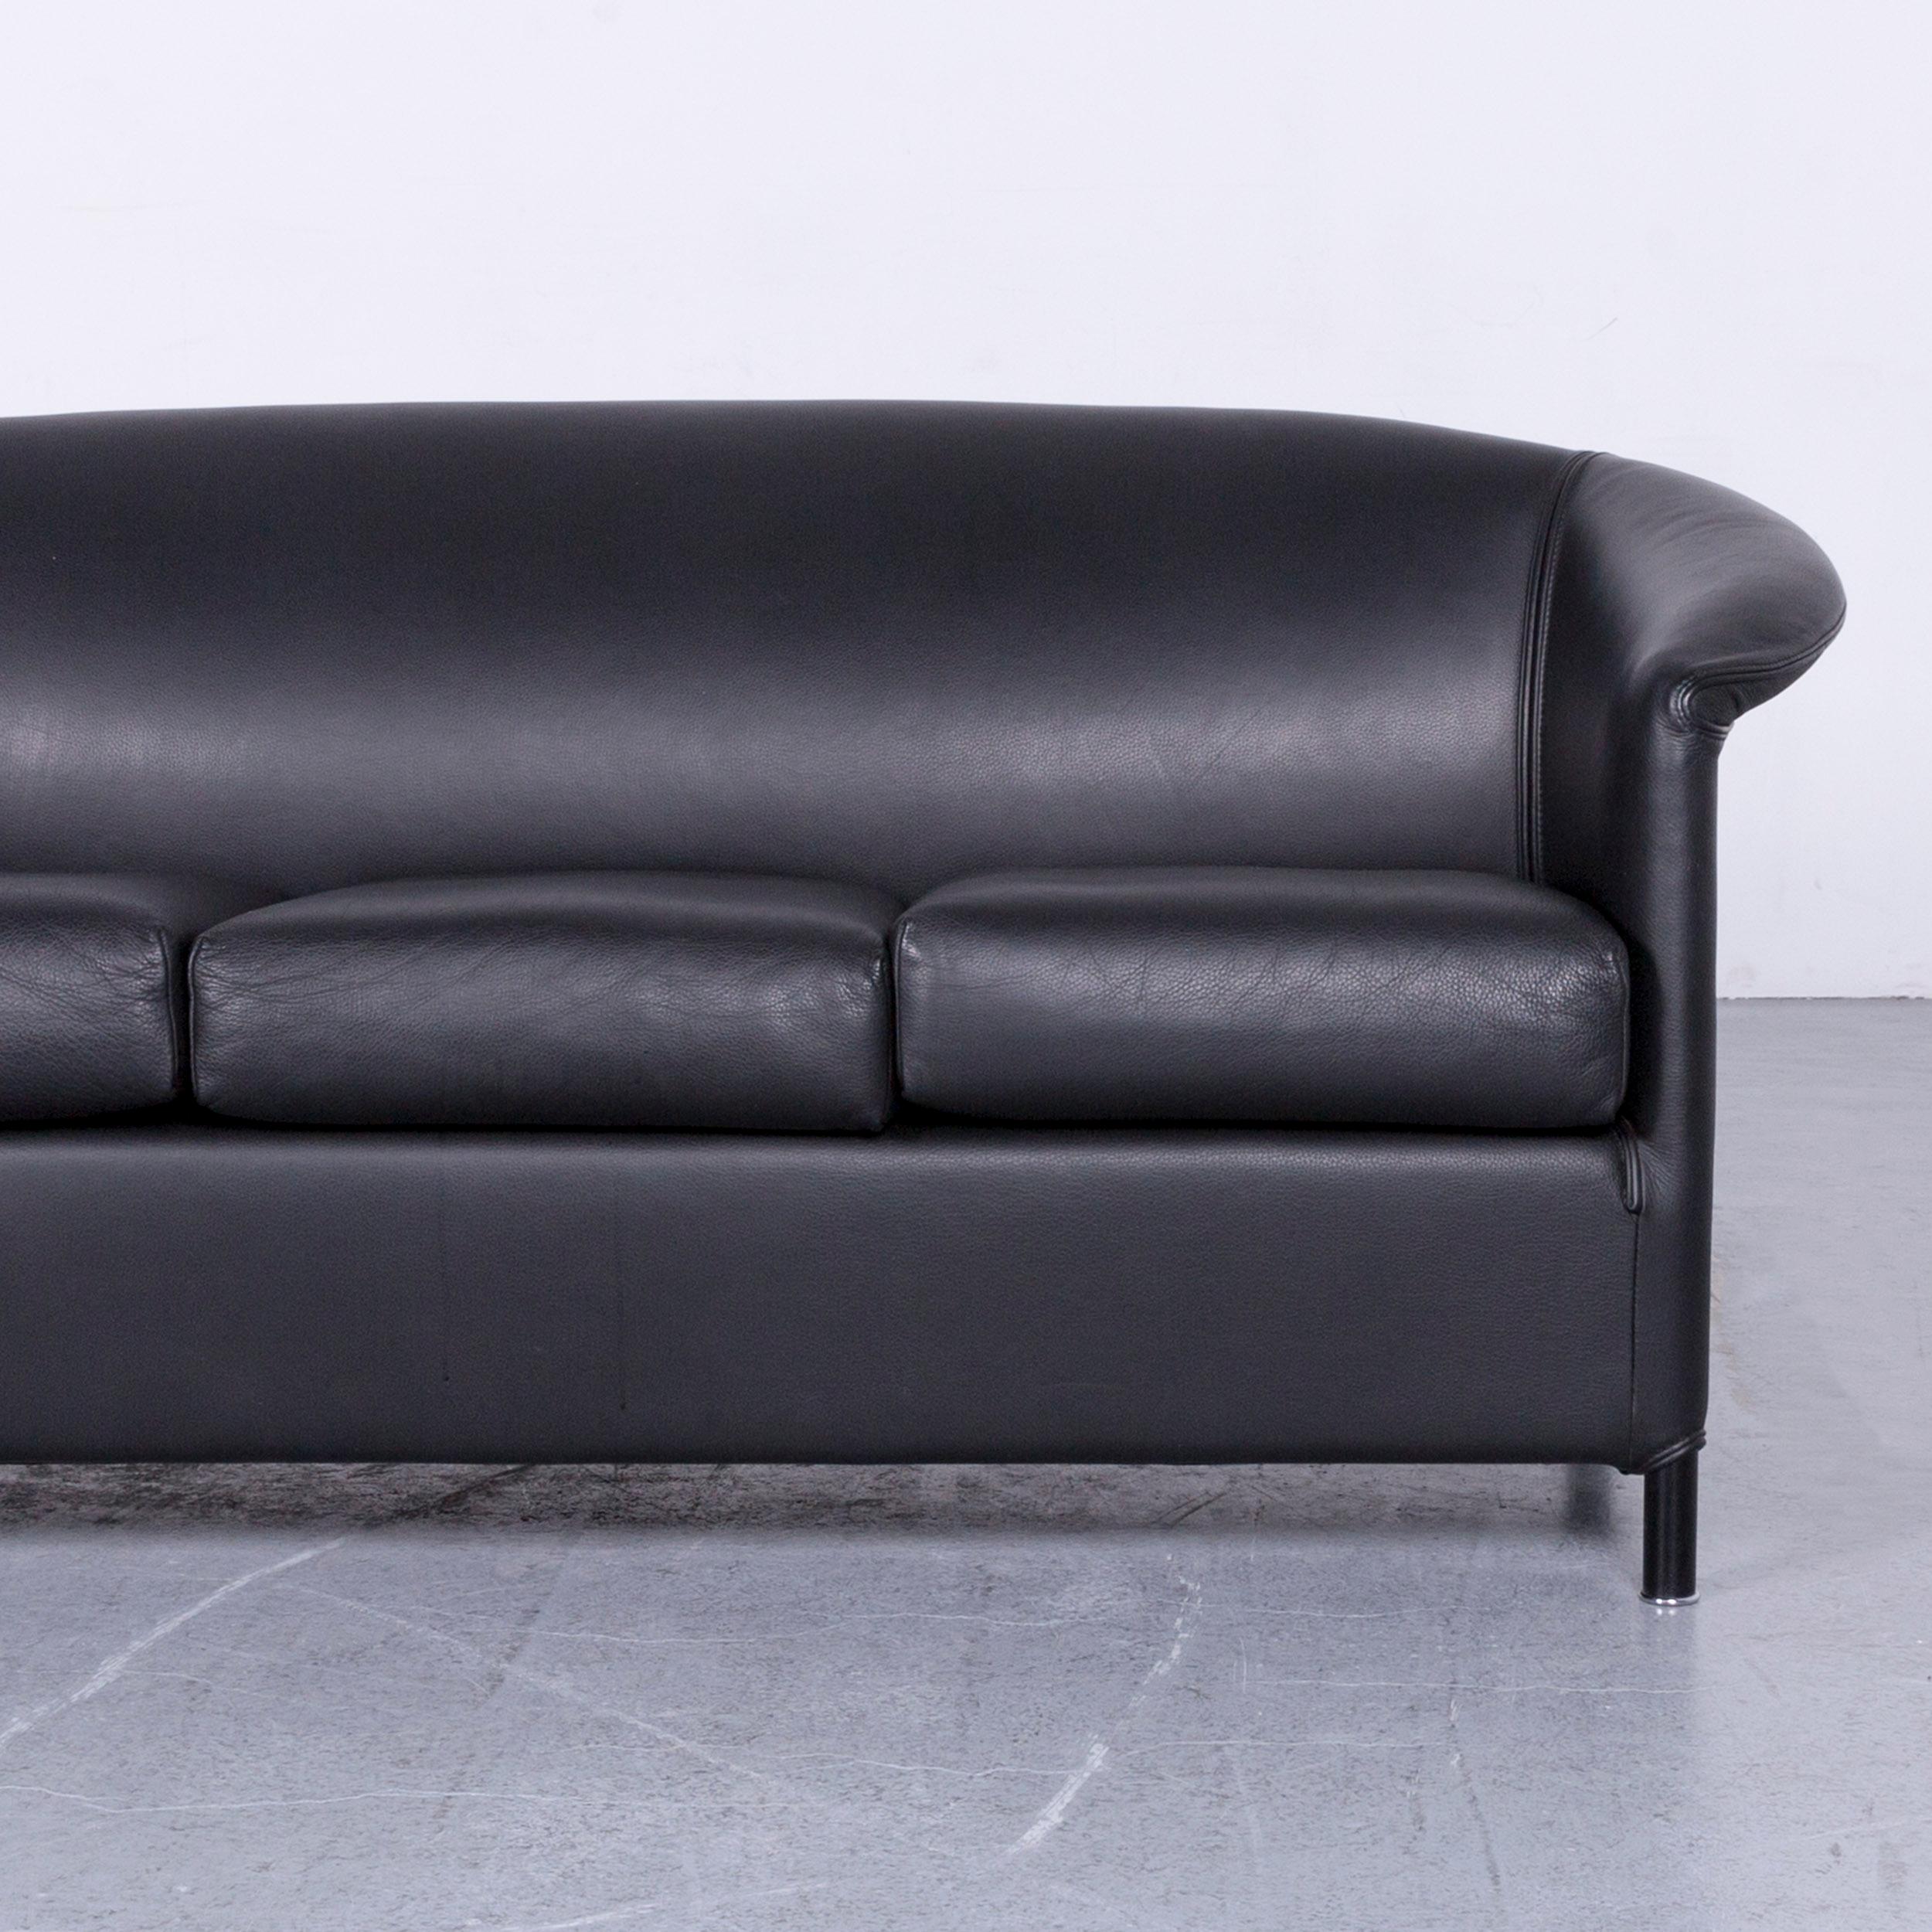 Wittmann Aura Designer Leather Sofa Black Two-Seat Couch In Good Condition For Sale In Cologne, DE